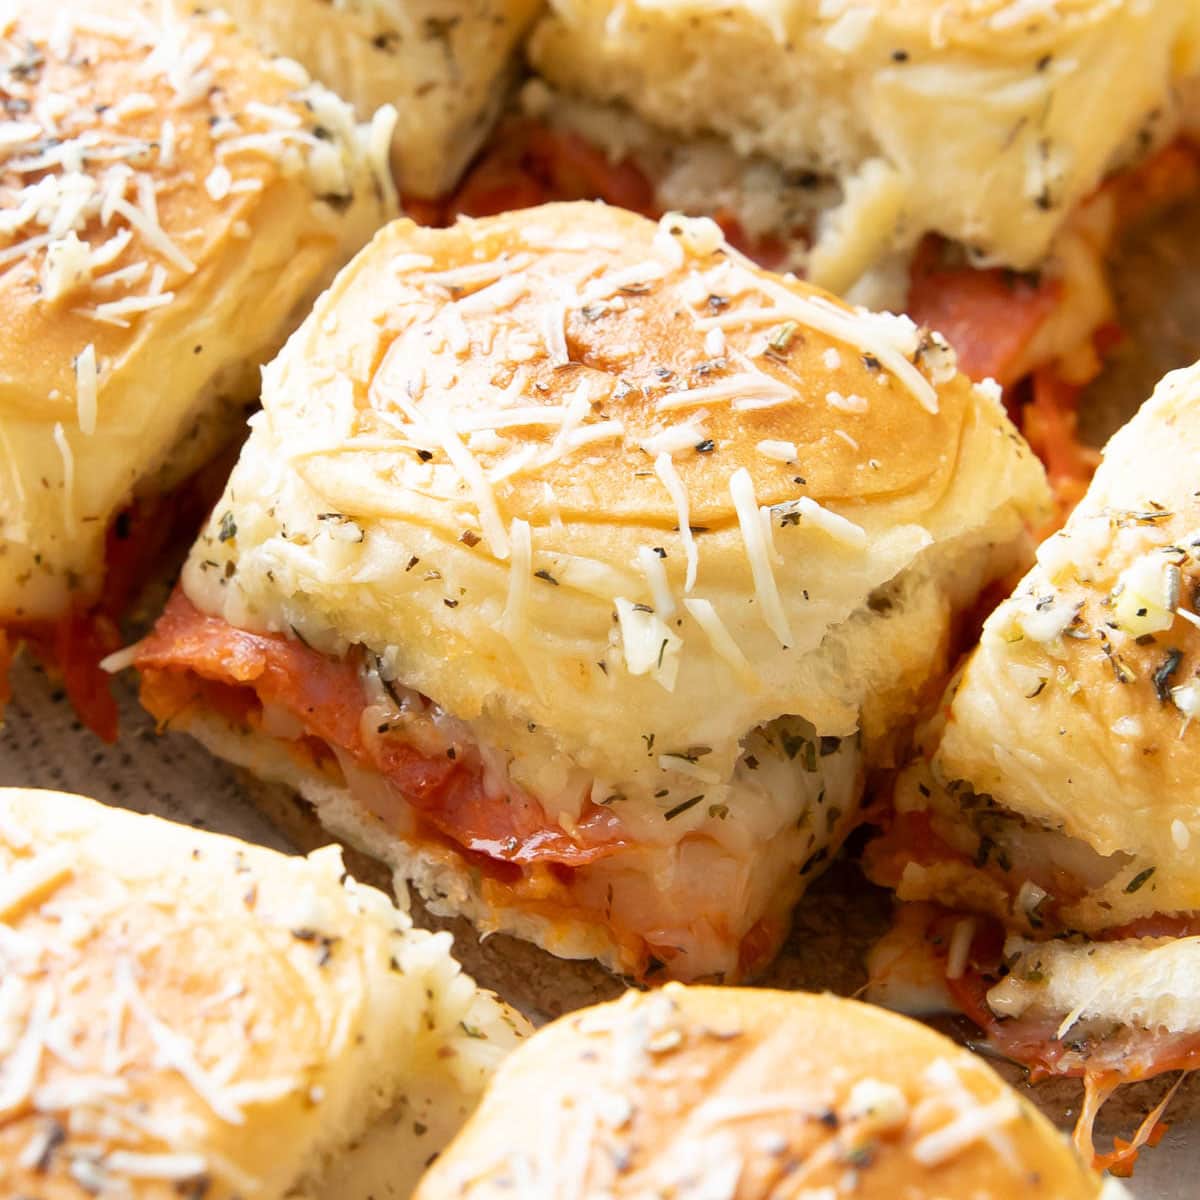 Pizza Sliders with melting cheese, zesty pepperoni, and butter topping